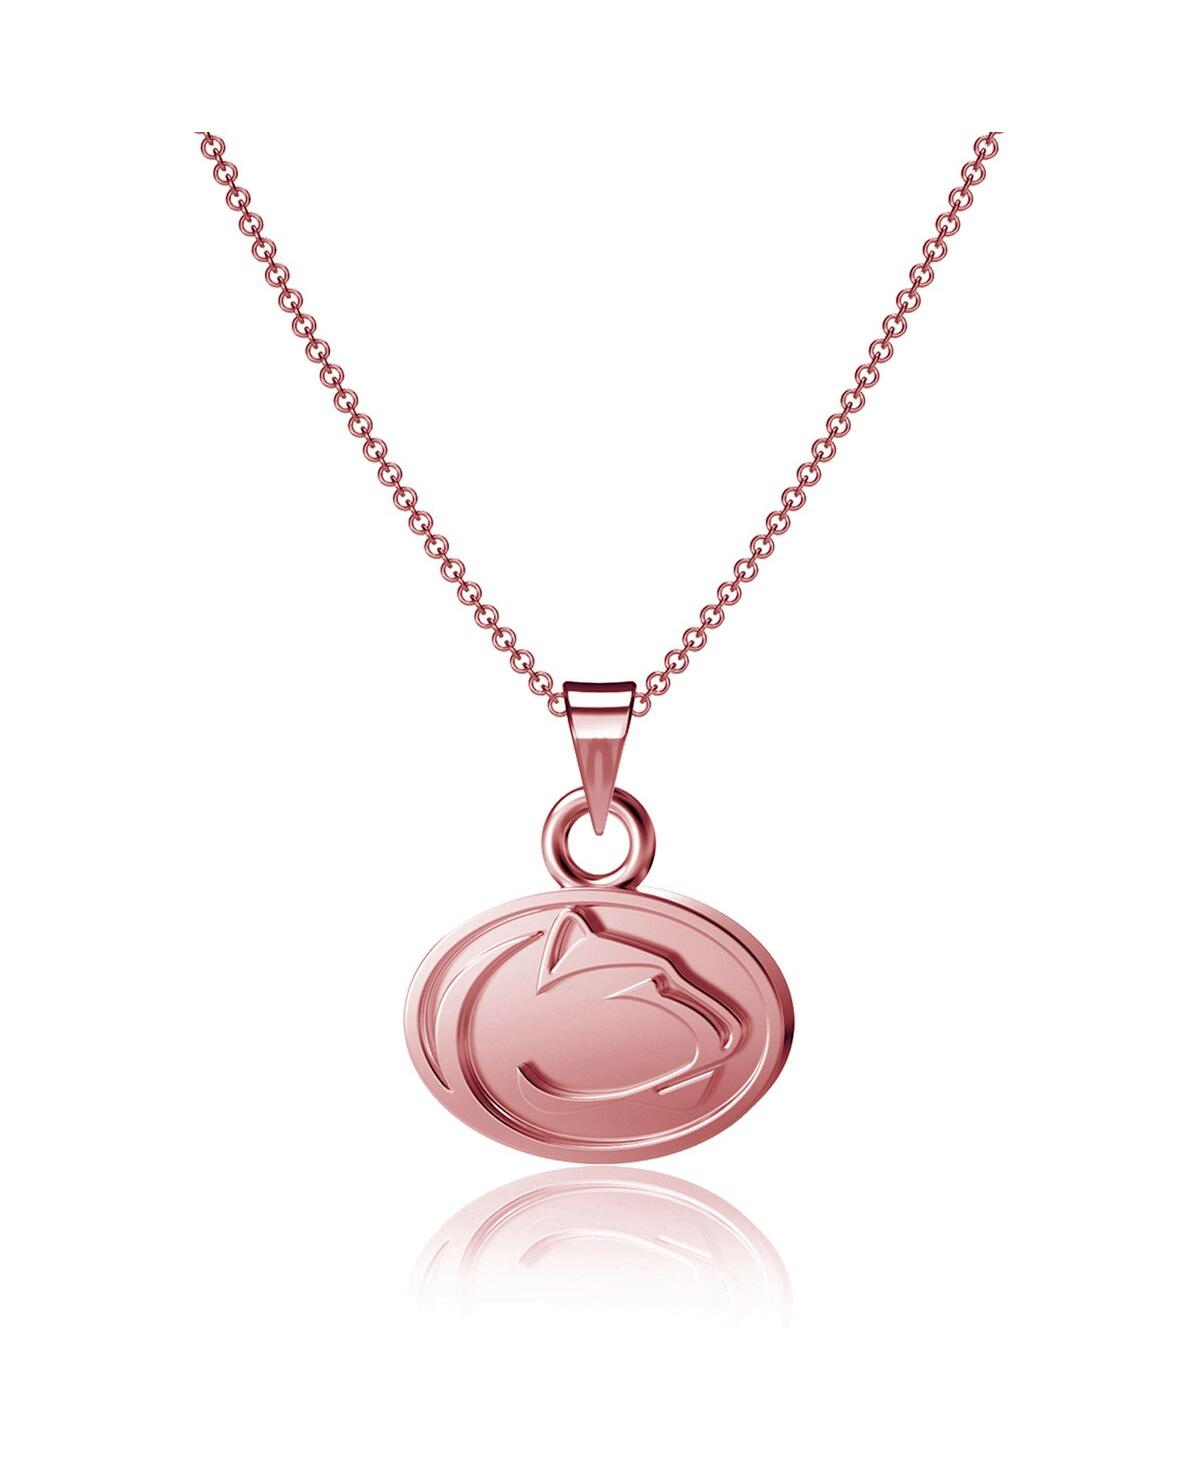 Dayna Designs Women's  Penn State Nittany Lions Rose Gold Pendant Necklace In Pink